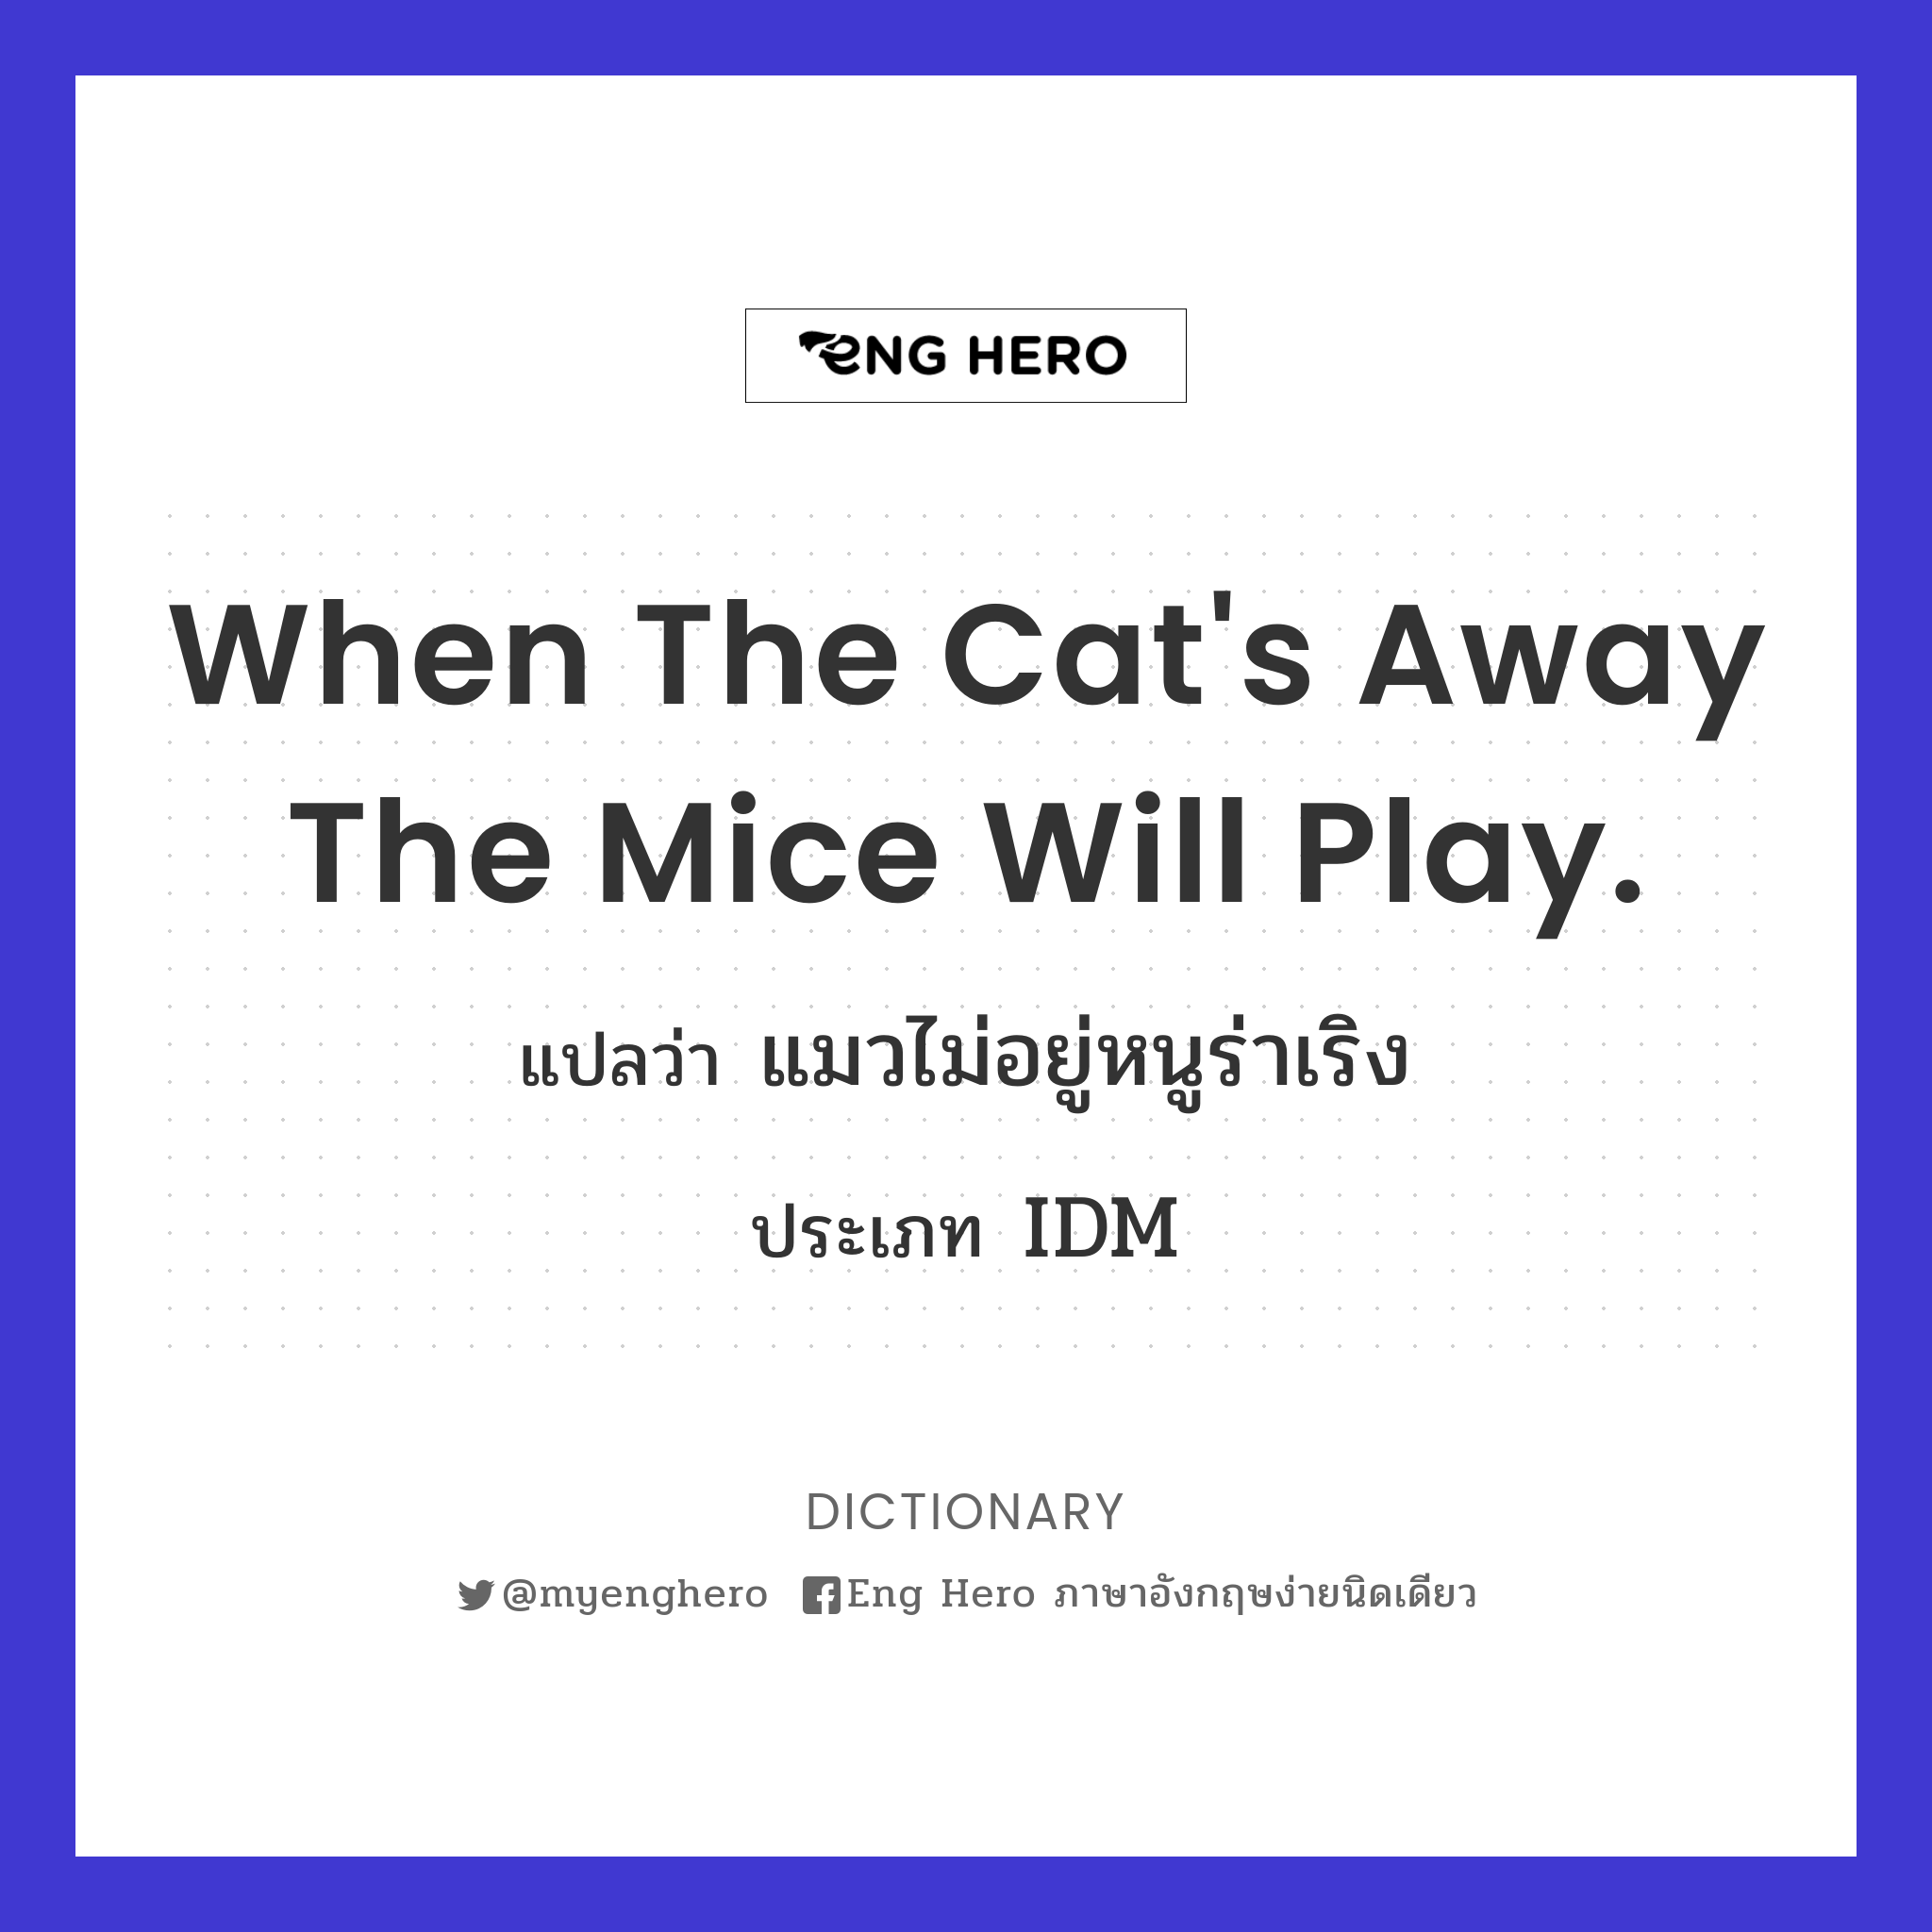 When the cat's away the mice will play.